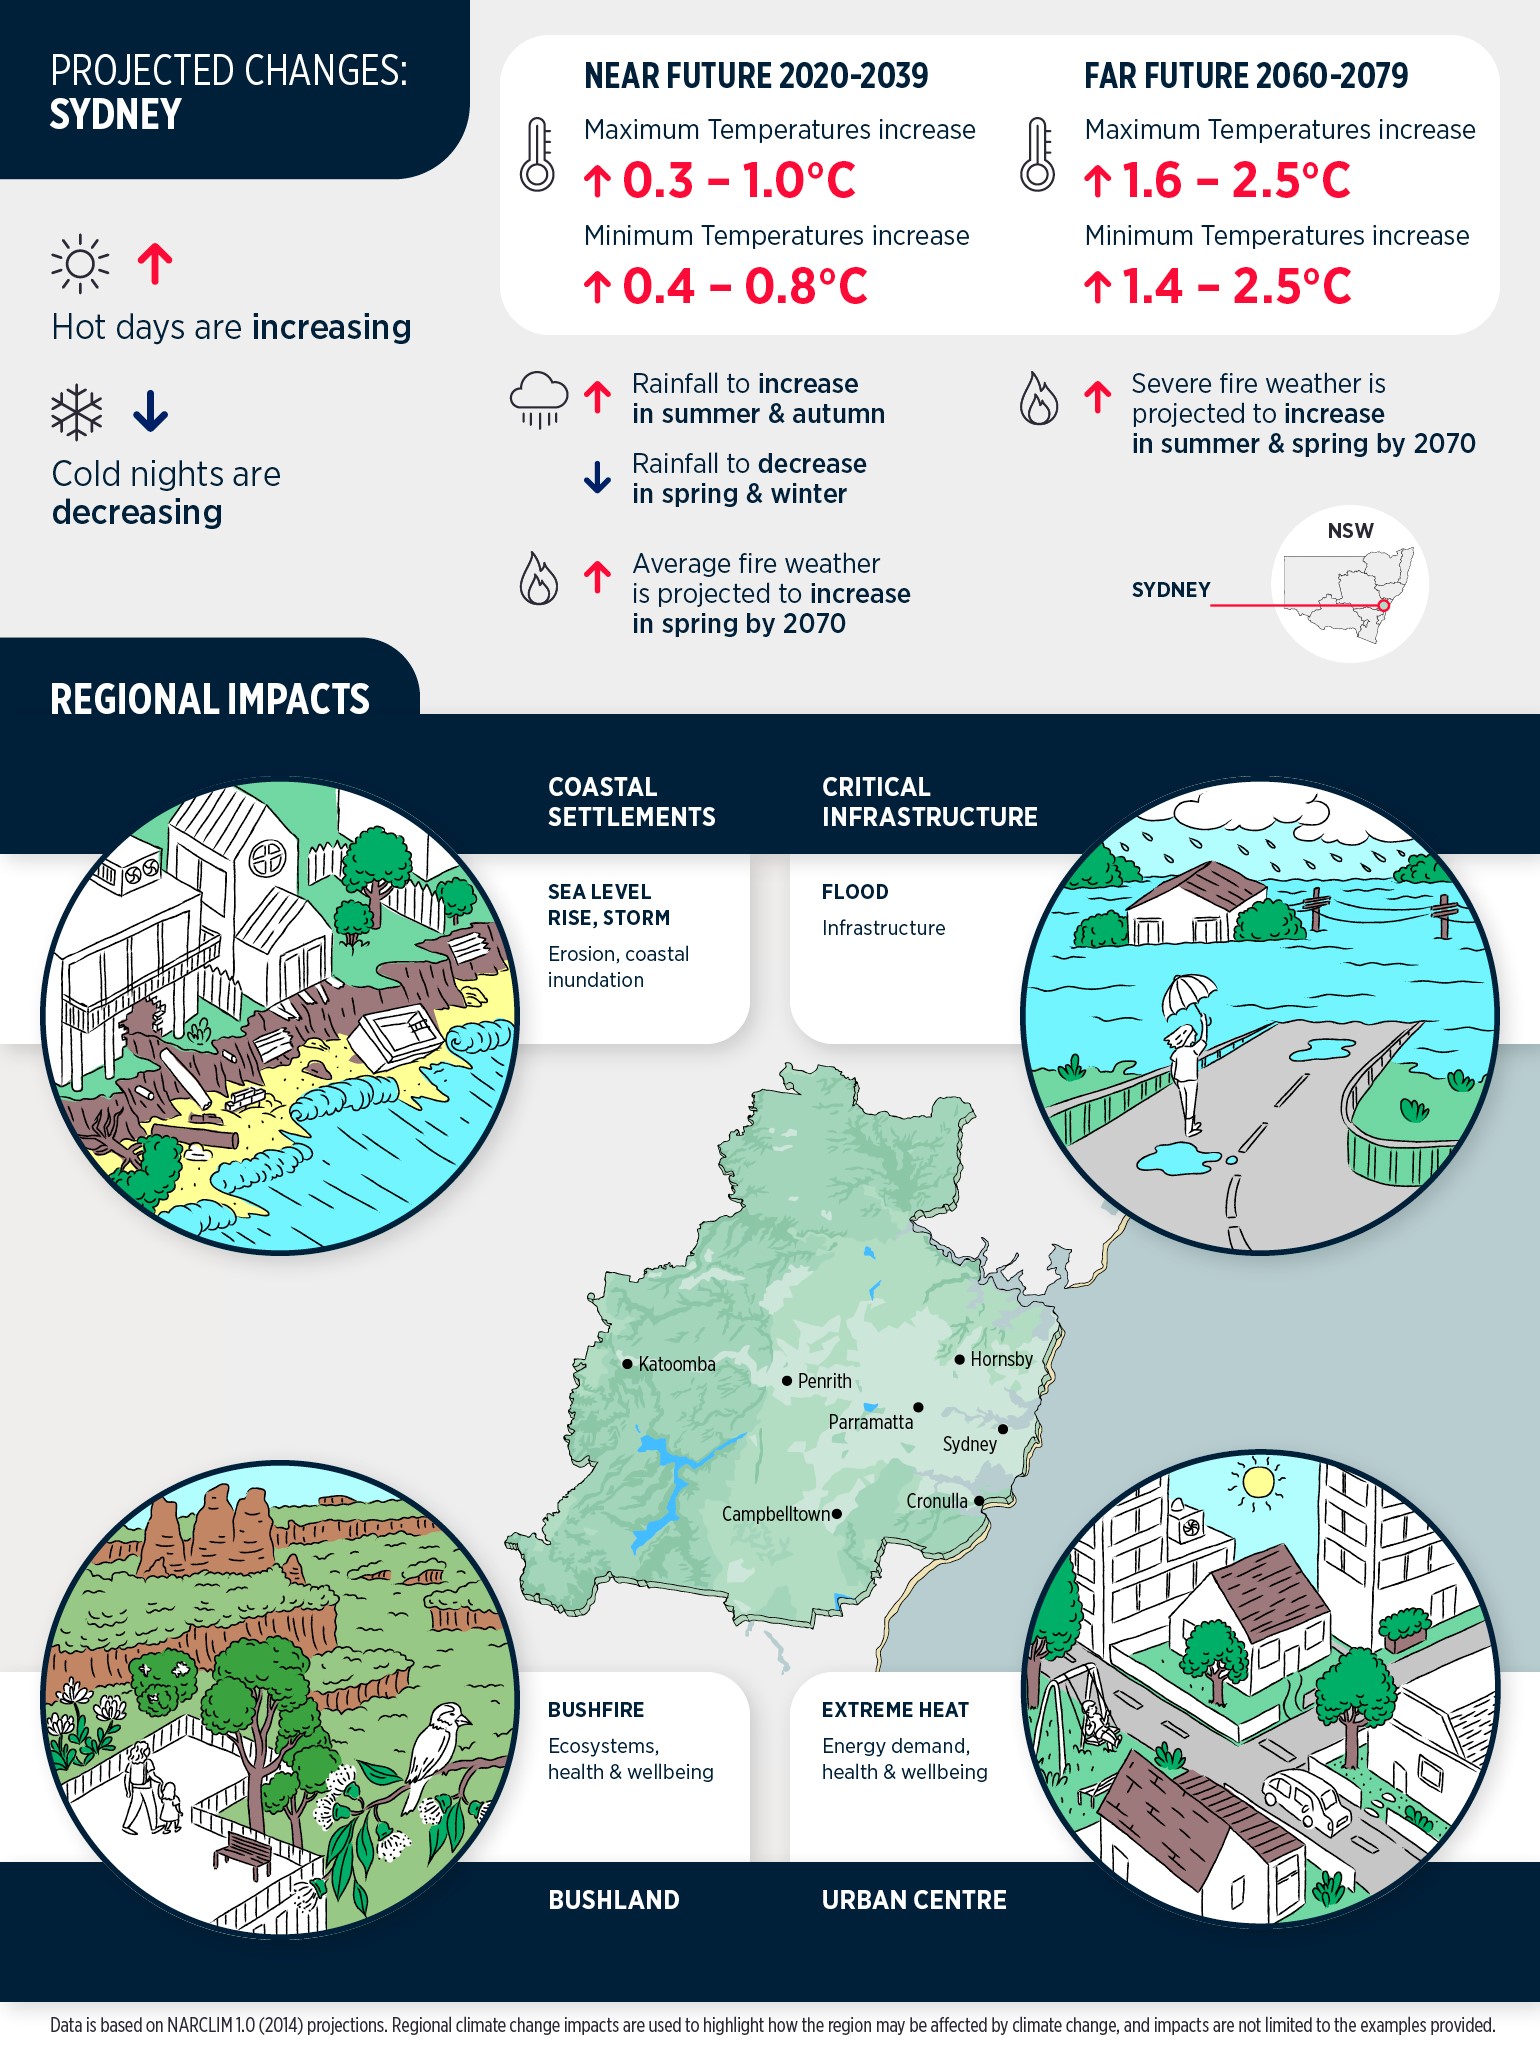 Metro Sydney climate change projections and regional impacts infographic